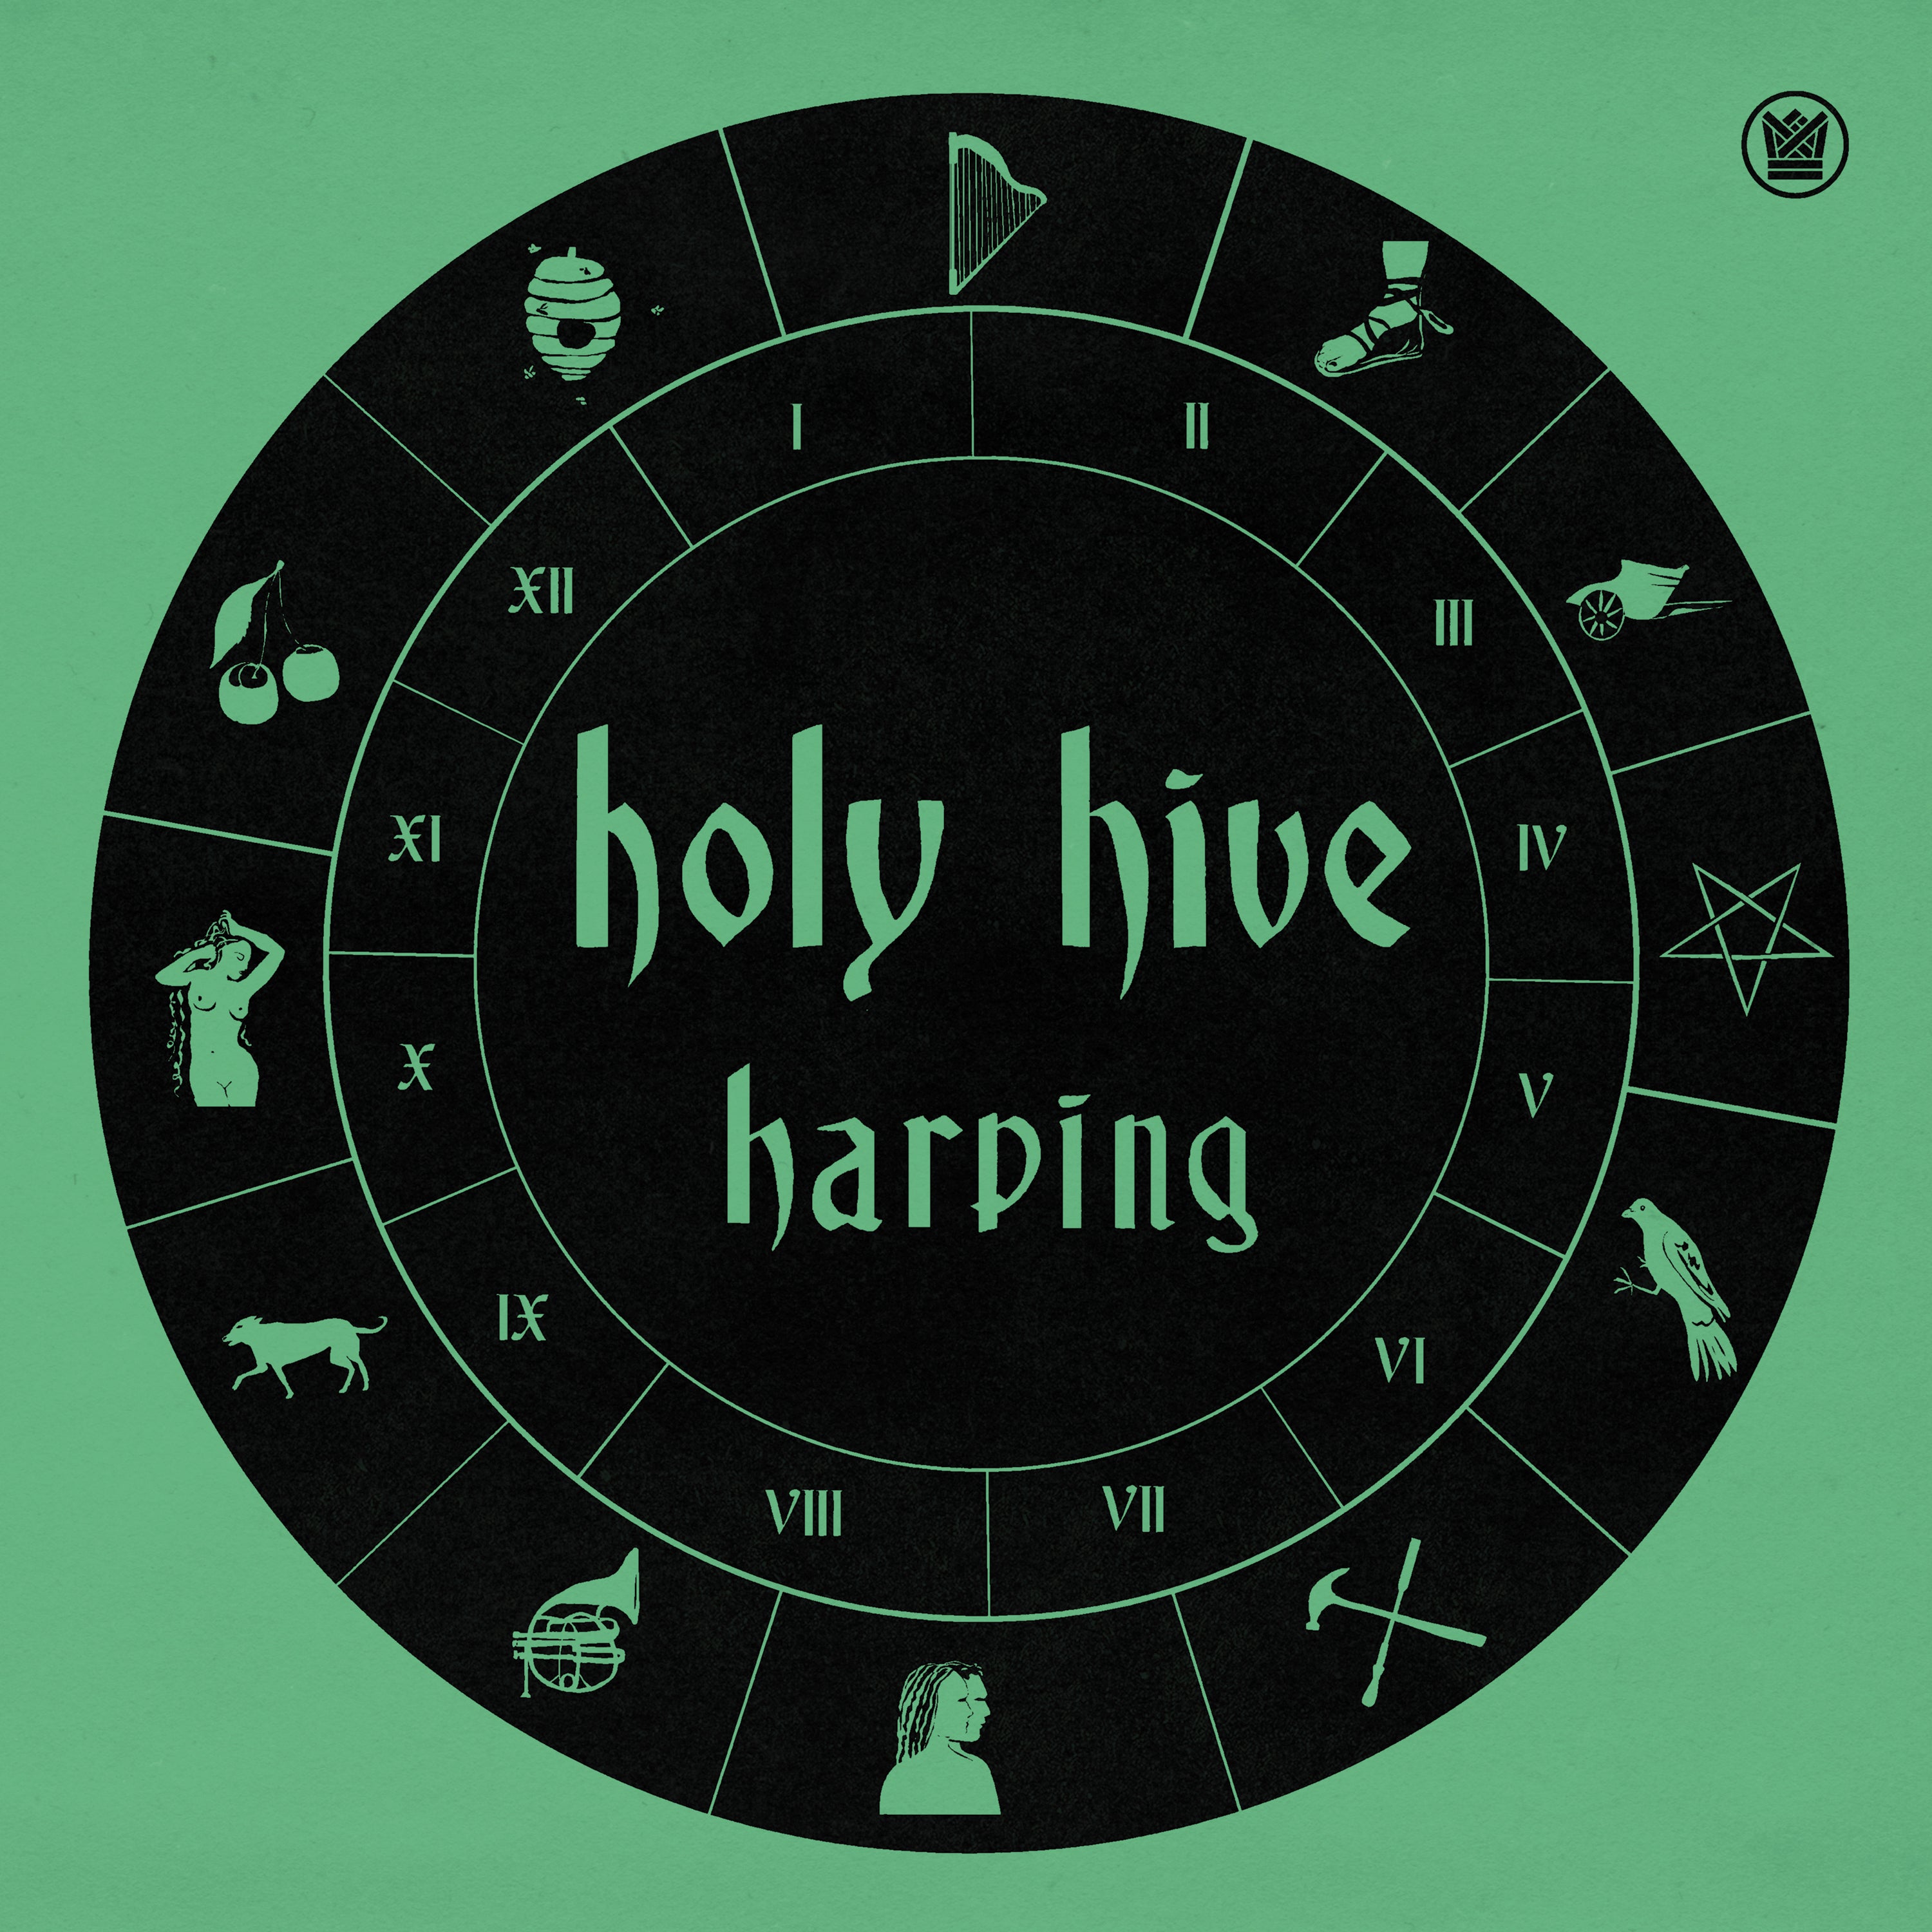 Holy Hive - Harping [12" EP]